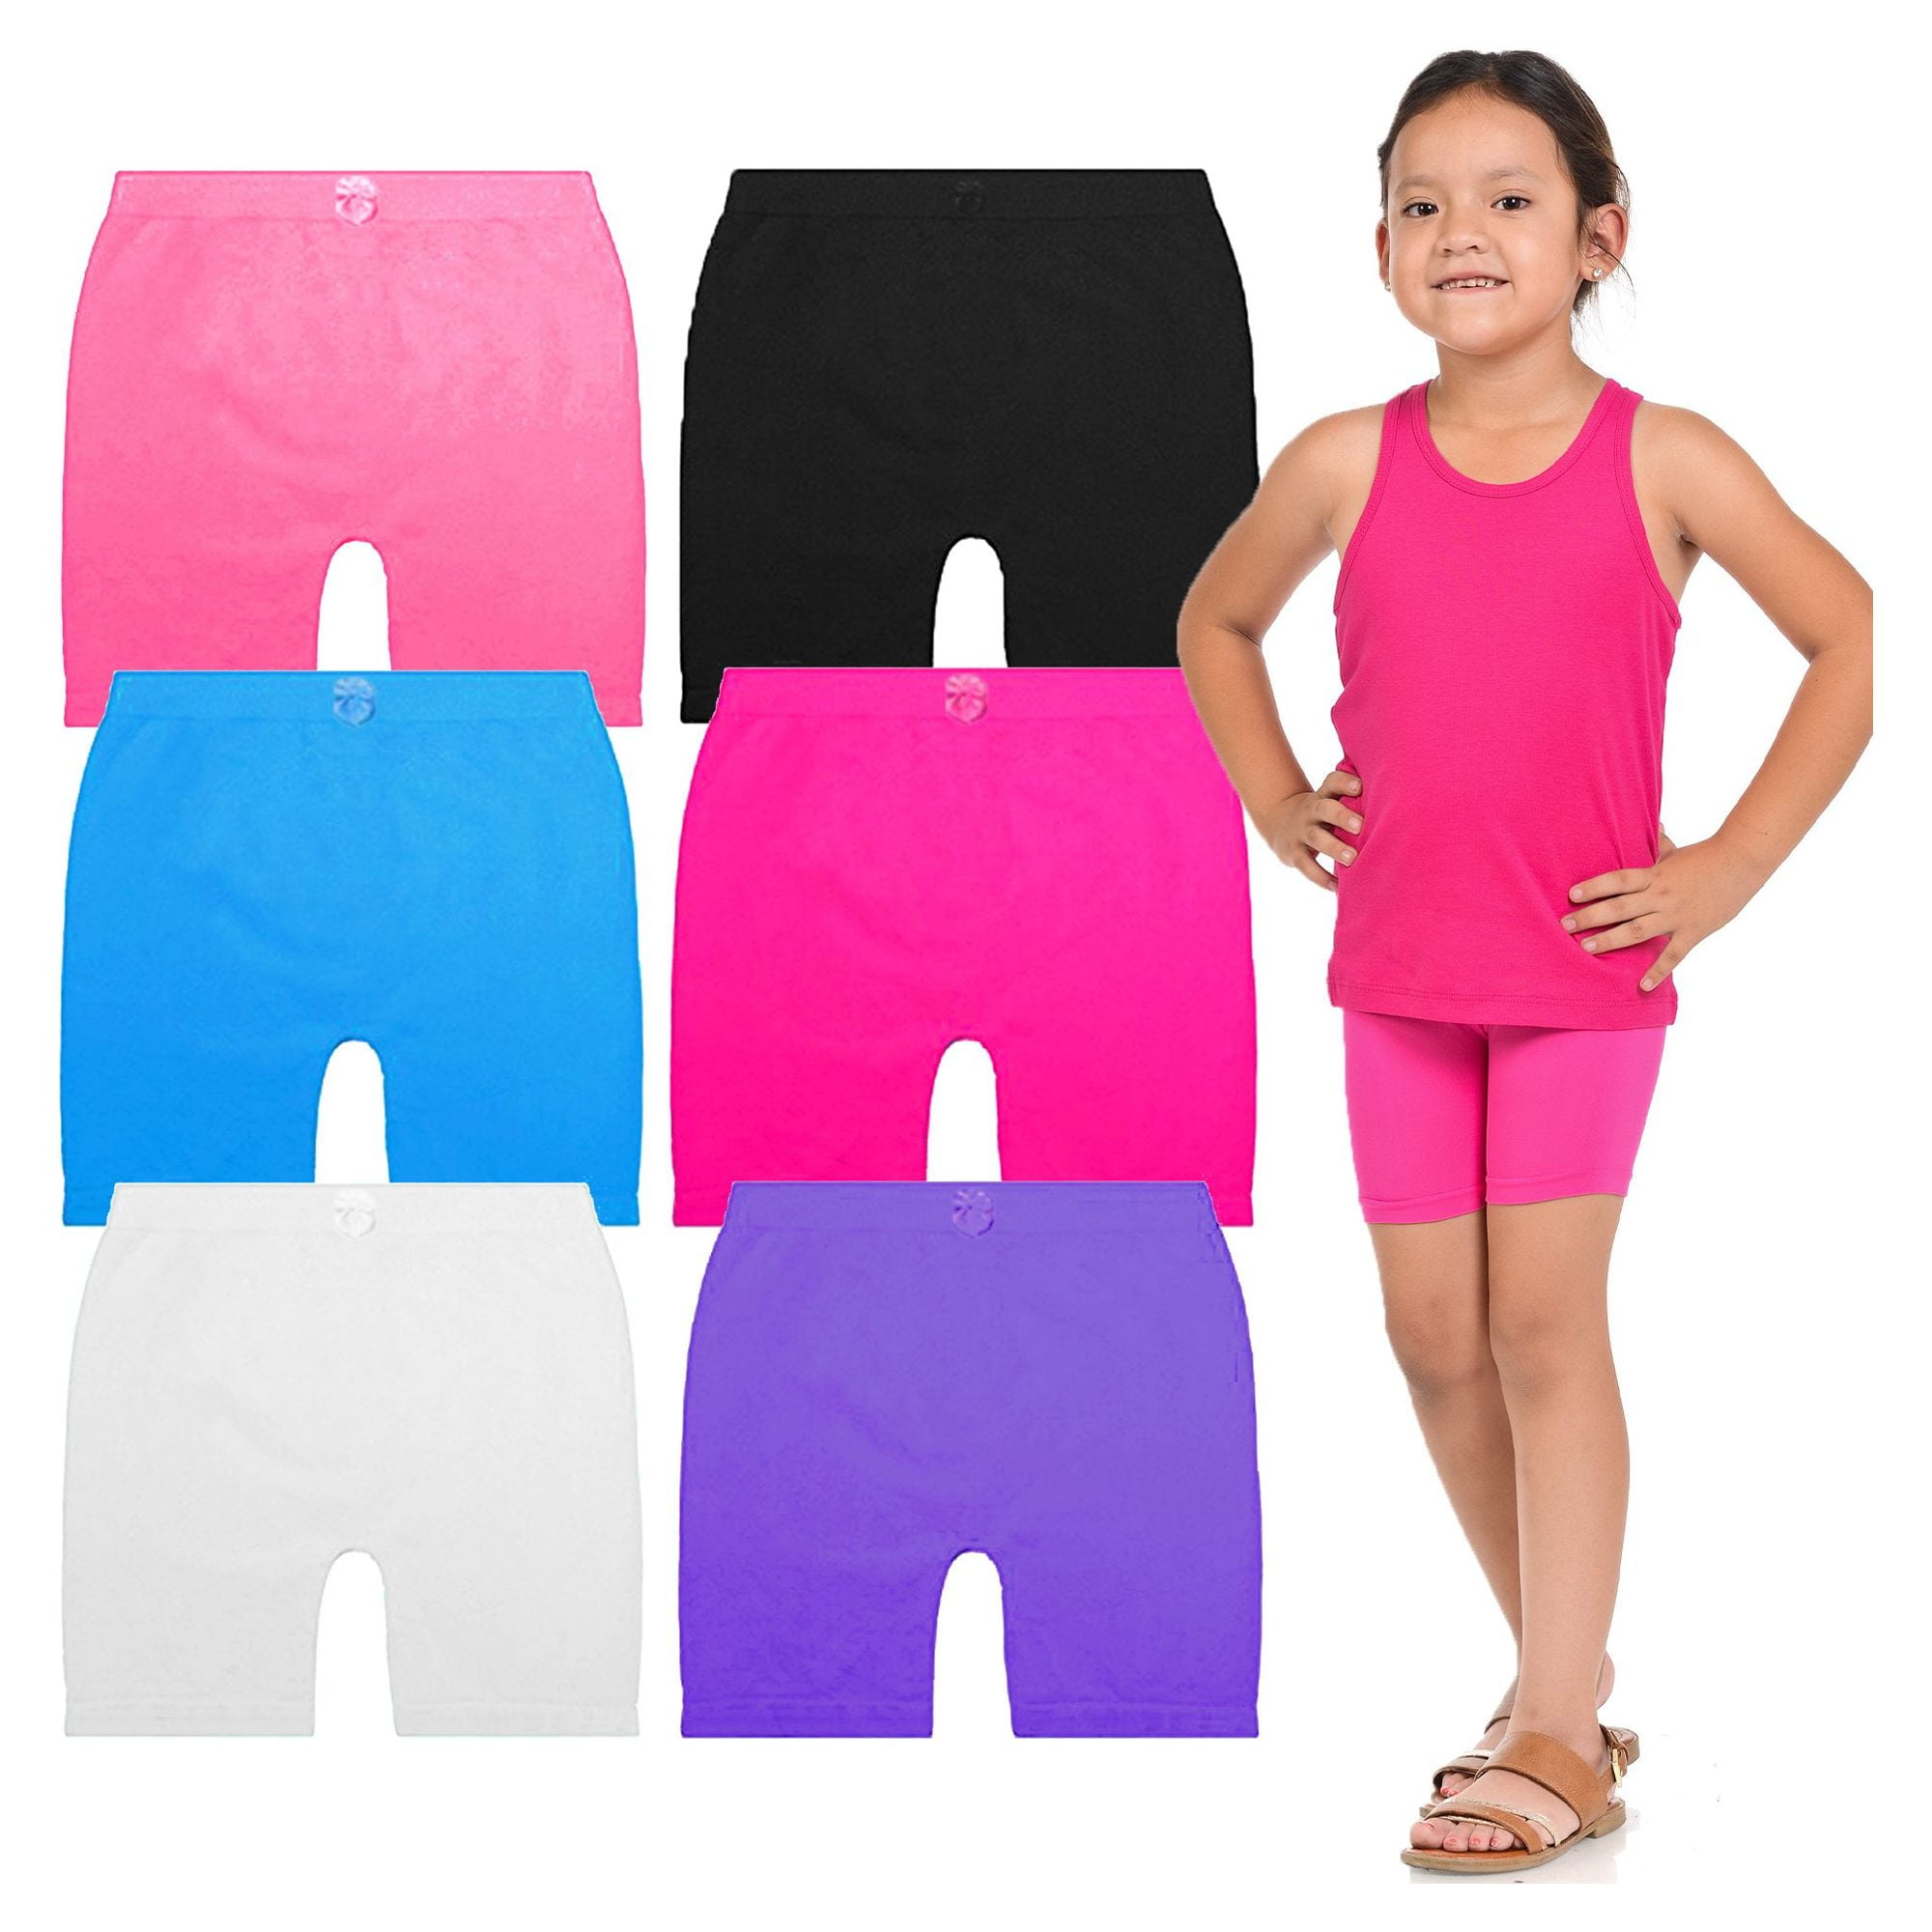 Buy Big Girls Under Shorts - Modesty Shorts for Girls 2-Pack Black & White  Combo - 8 at Amazon.in